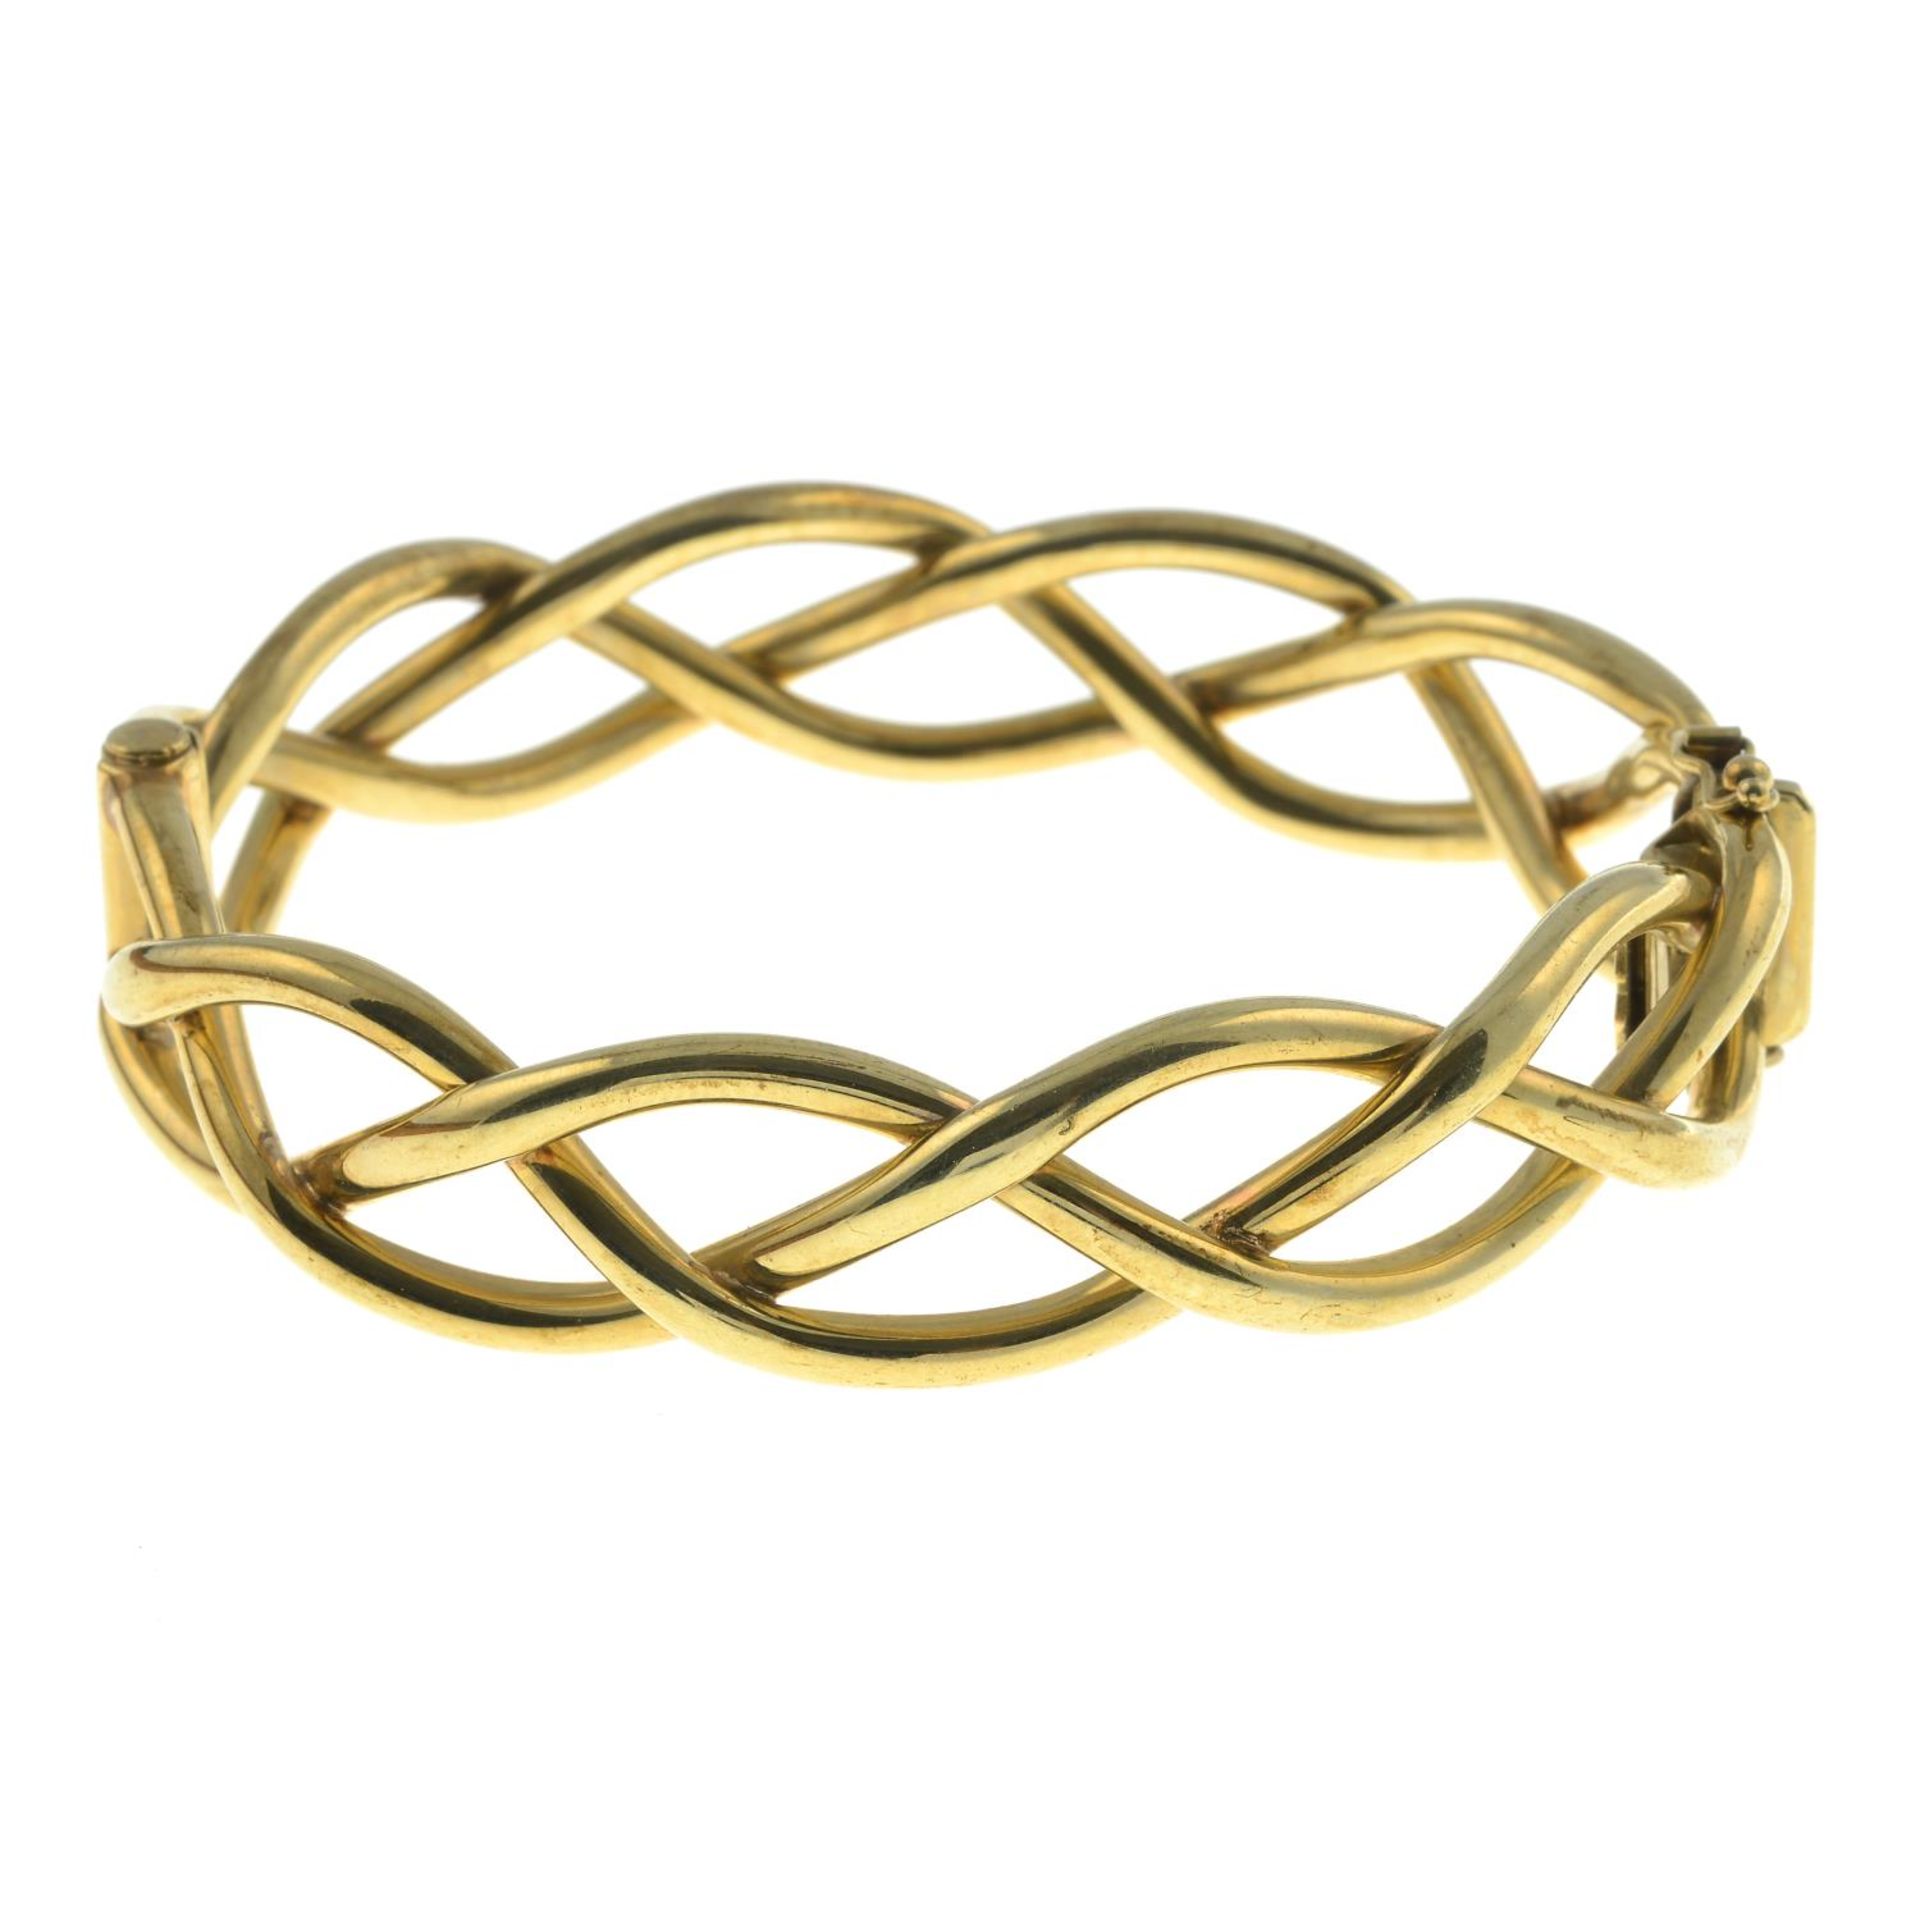 A 9ct gold woven bangle.Hallmarks for 9ct gold.